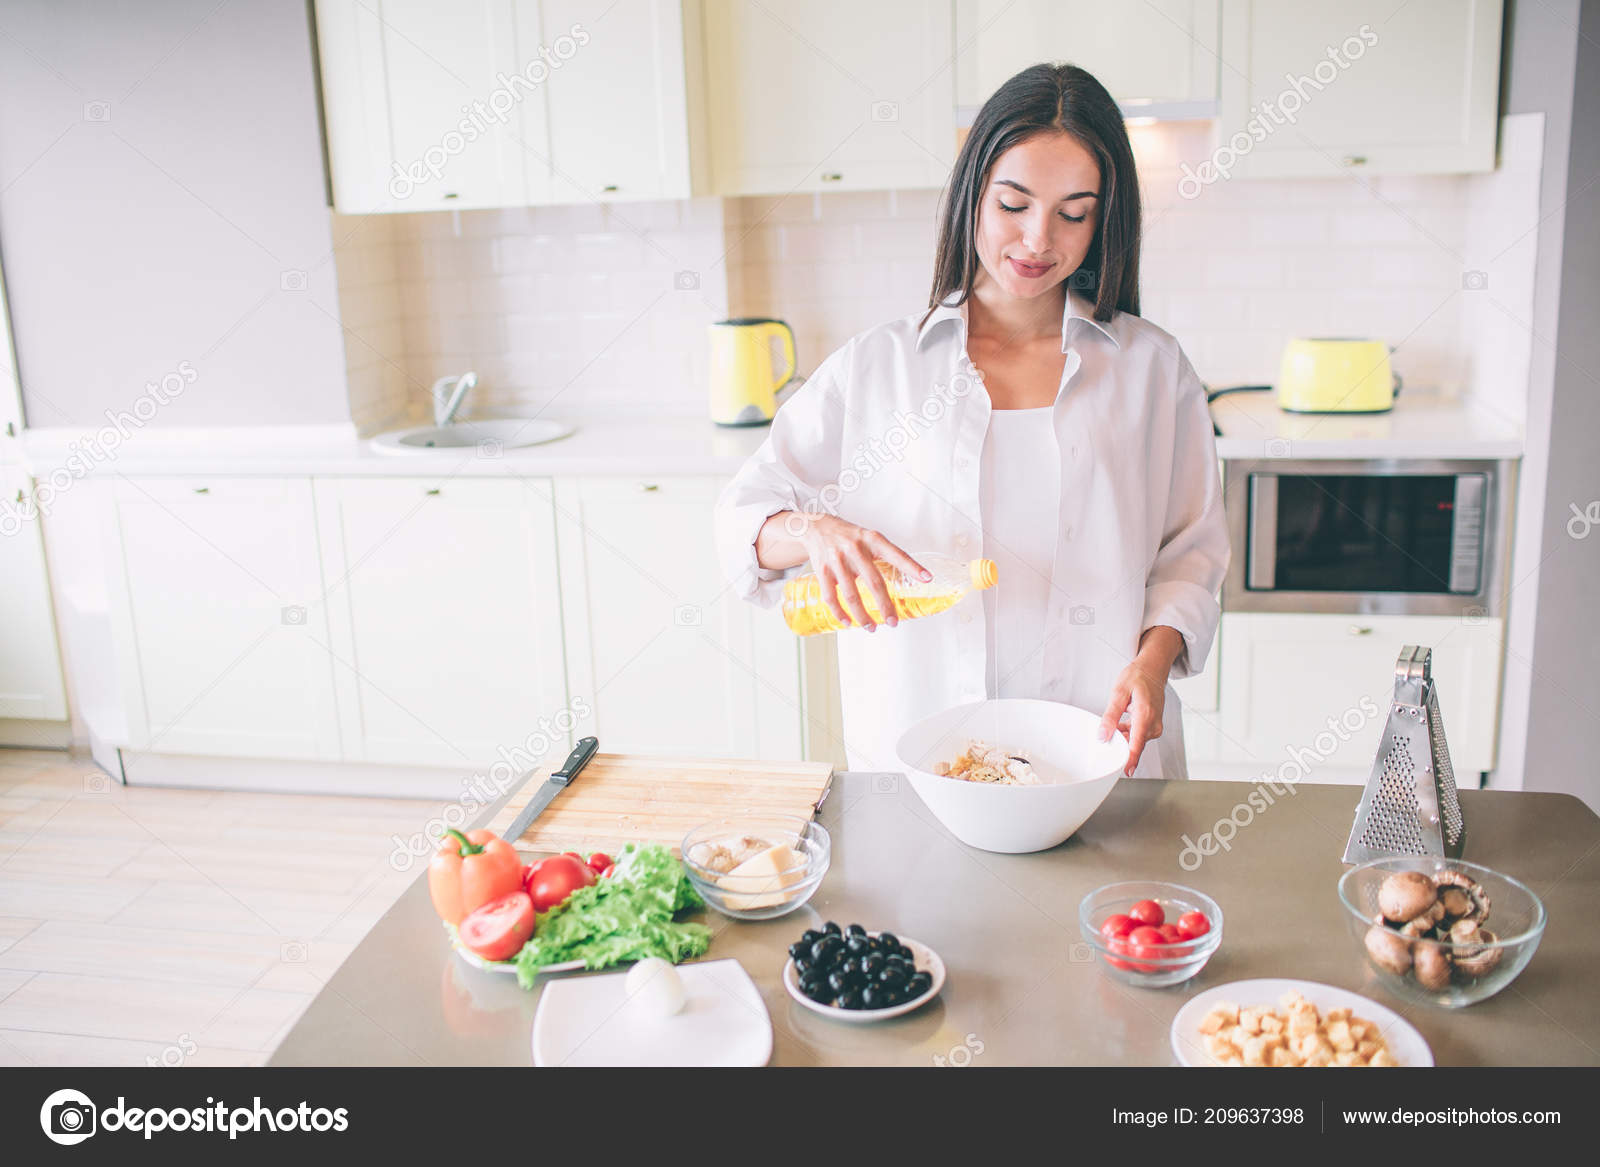 Nice Girl Is Cooking In Kitchen She Is Mixing Ingredients For Salad In Bowl Girl Is Calm And Concentrated Stock Photo Image By C Estradaanton